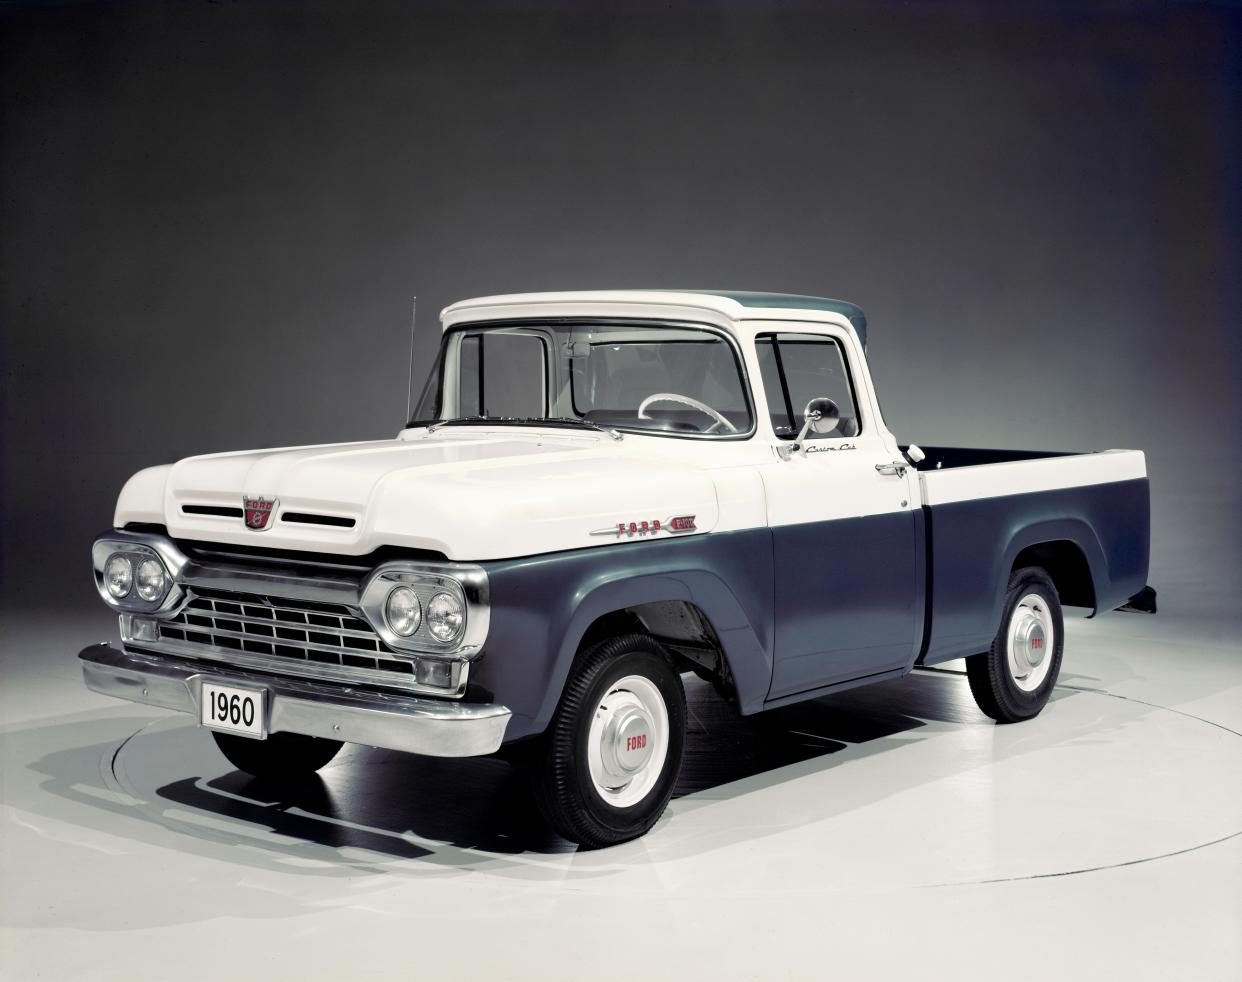 This is a 1960 Ford F-100 pickup truck. In 1959, The F-100 and F-250 pickups became the first Ford trucks to offer a four-wheel-drive option. The F150 is a light-duty, half-ton truck while an F-250 is a three-quarter ton heavy duty truck for serious towing and hauling.